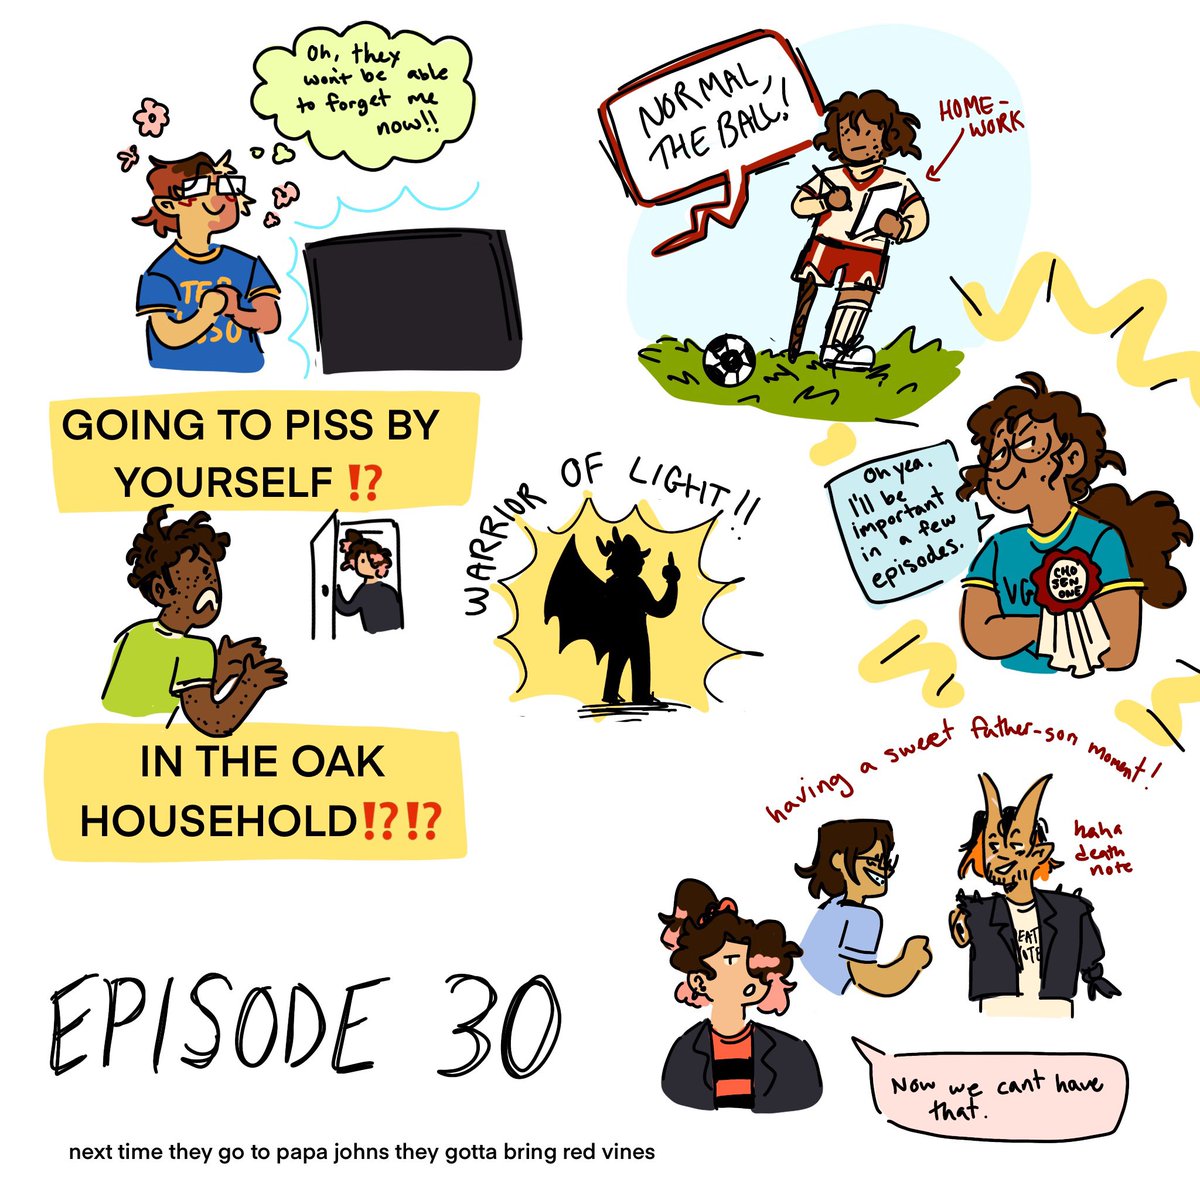 new ep doodle page!! #dndads #DungeonsandDaddies